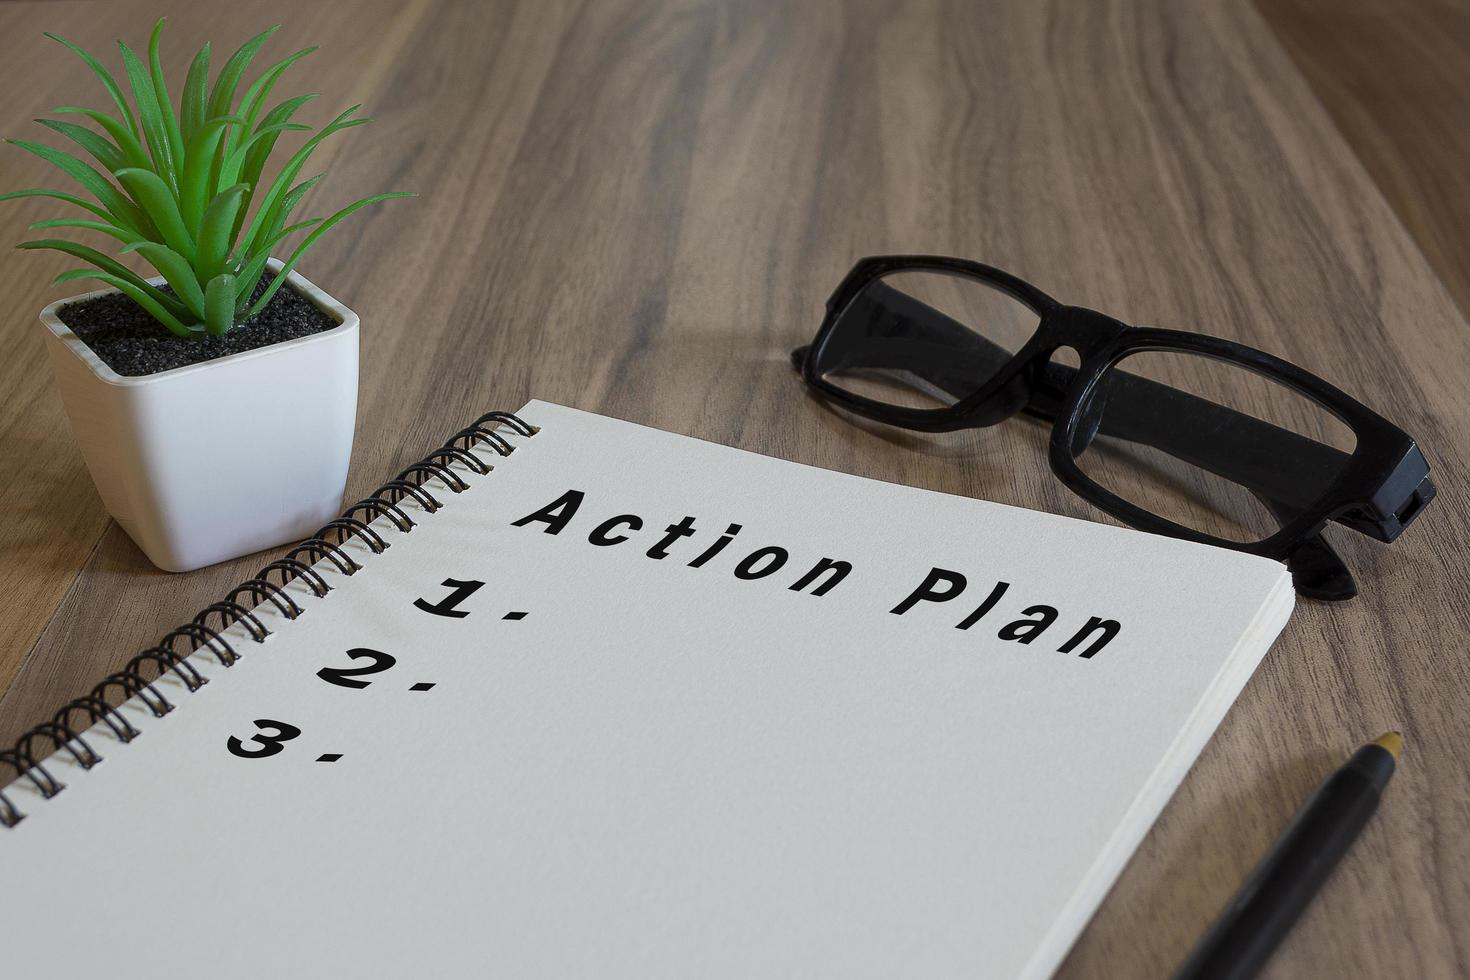 Action plan text on white notepad with potted plan, glasses and a pen on wooden desk photo